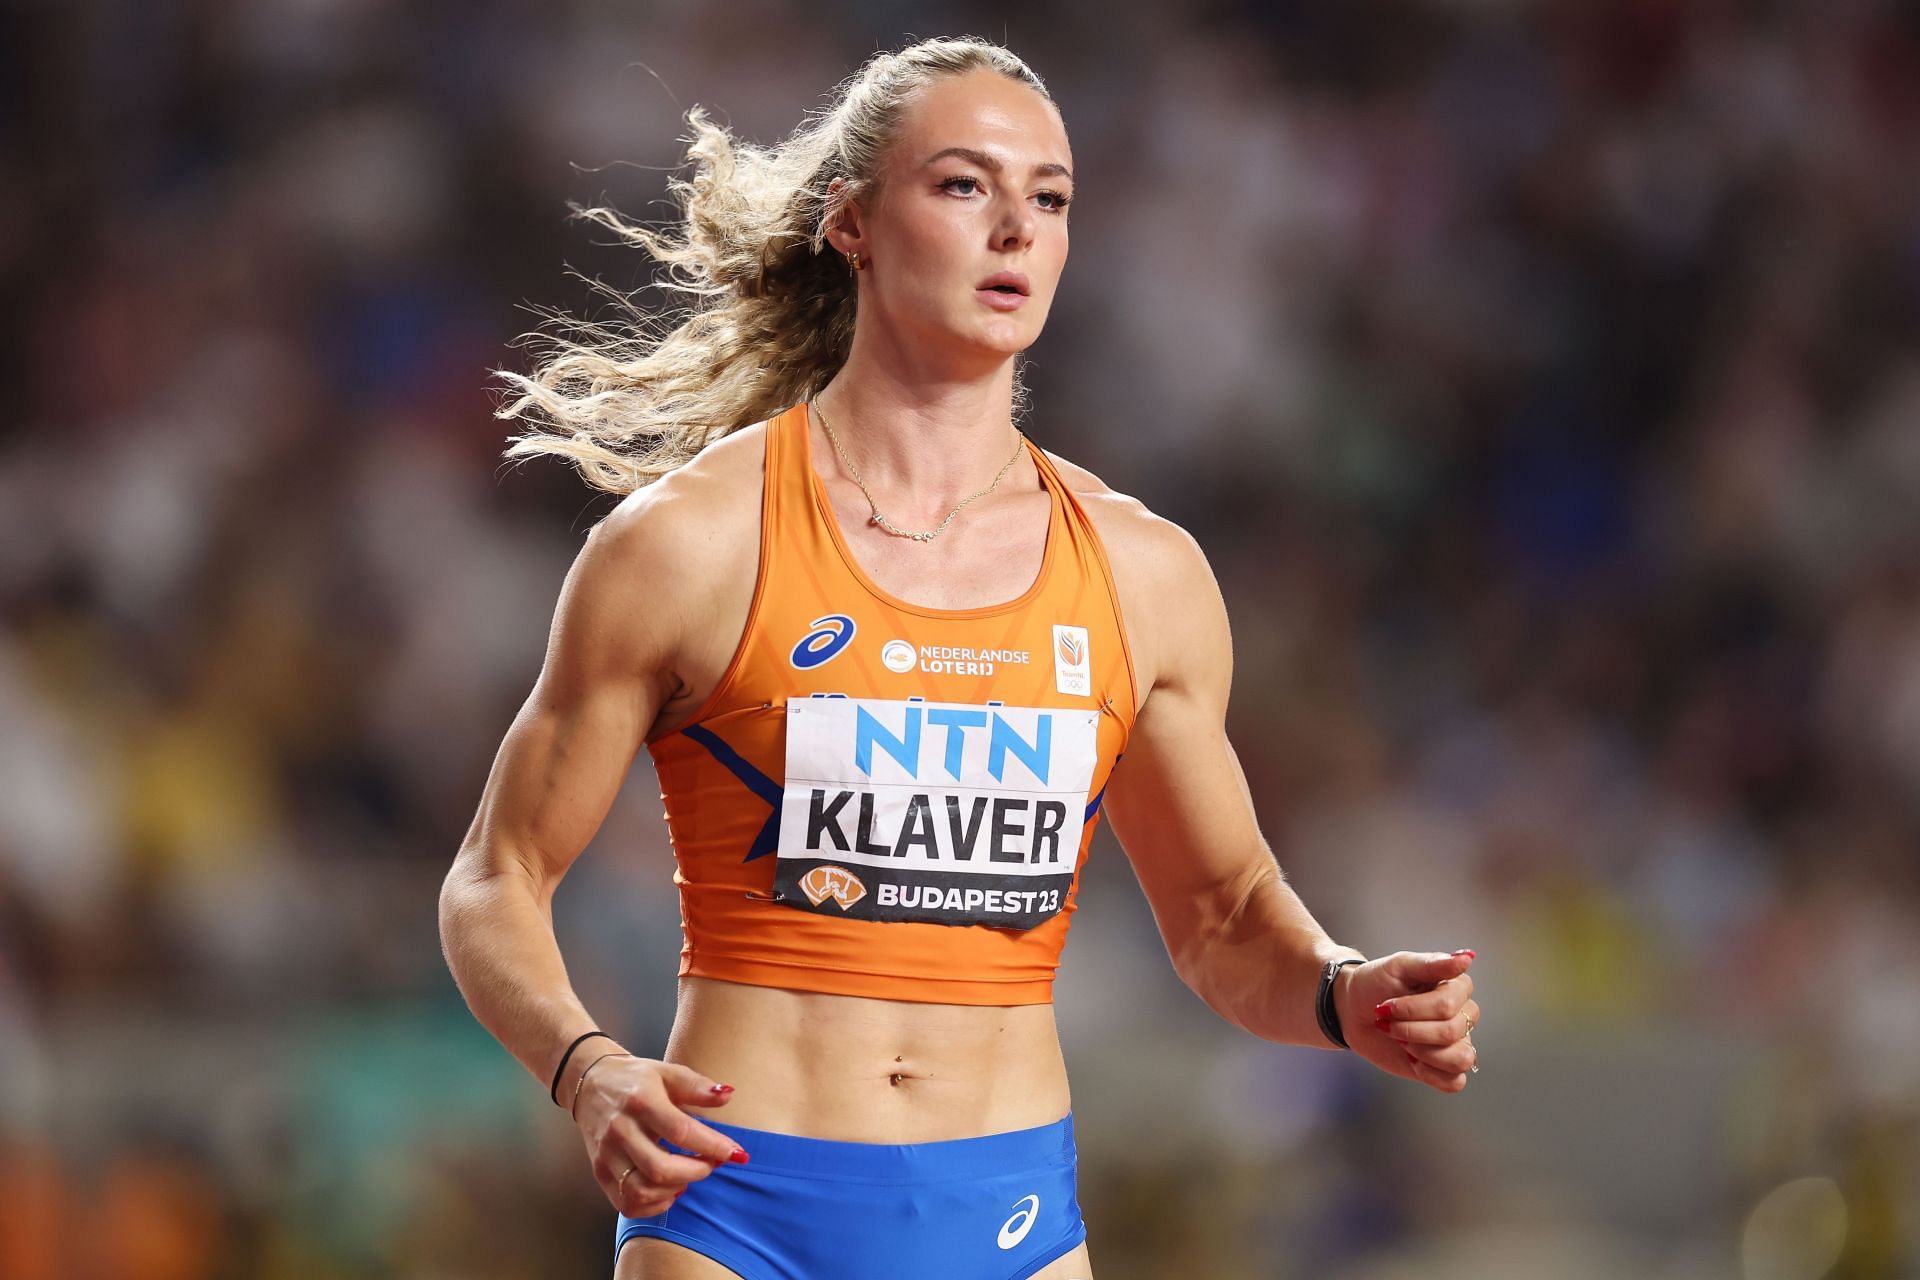 2023 World Athletics Championships Schedule Today Schedule, start time, live stream details and more Day 5